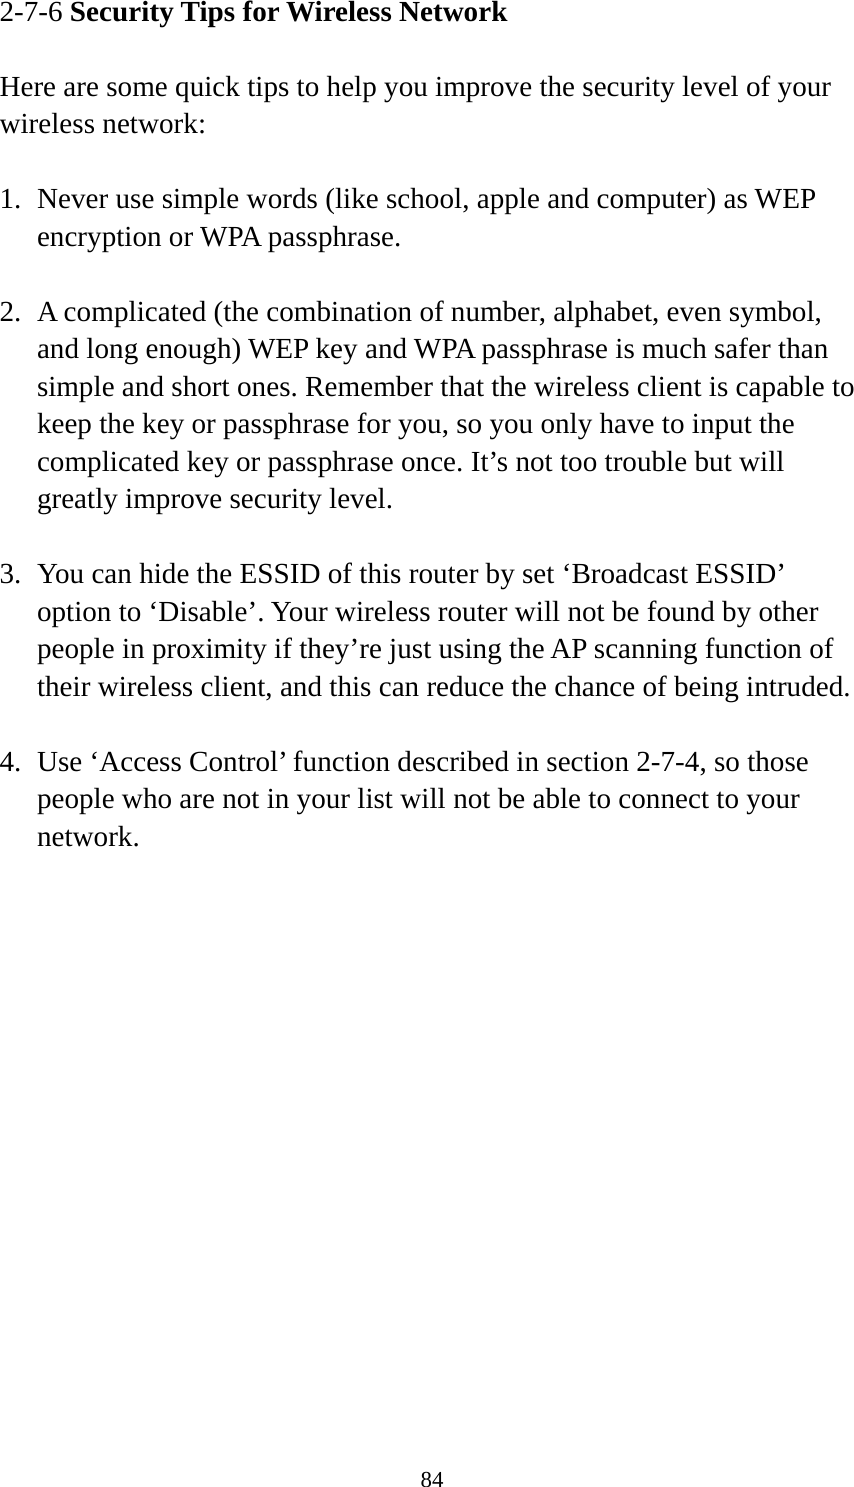 84 2-7-6 Security Tips for Wireless Network  Here are some quick tips to help you improve the security level of your wireless network:  1. Never use simple words (like school, apple and computer) as WEP encryption or WPA passphrase.  2. A complicated (the combination of number, alphabet, even symbol, and long enough) WEP key and WPA passphrase is much safer than simple and short ones. Remember that the wireless client is capable to keep the key or passphrase for you, so you only have to input the complicated key or passphrase once. It’s not too trouble but will greatly improve security level.  3. You can hide the ESSID of this router by set ‘Broadcast ESSID’ option to ‘Disable’. Your wireless router will not be found by other people in proximity if they’re just using the AP scanning function of their wireless client, and this can reduce the chance of being intruded.  4. Use ‘Access Control’ function described in section 2-7-4, so those people who are not in your list will not be able to connect to your network. 